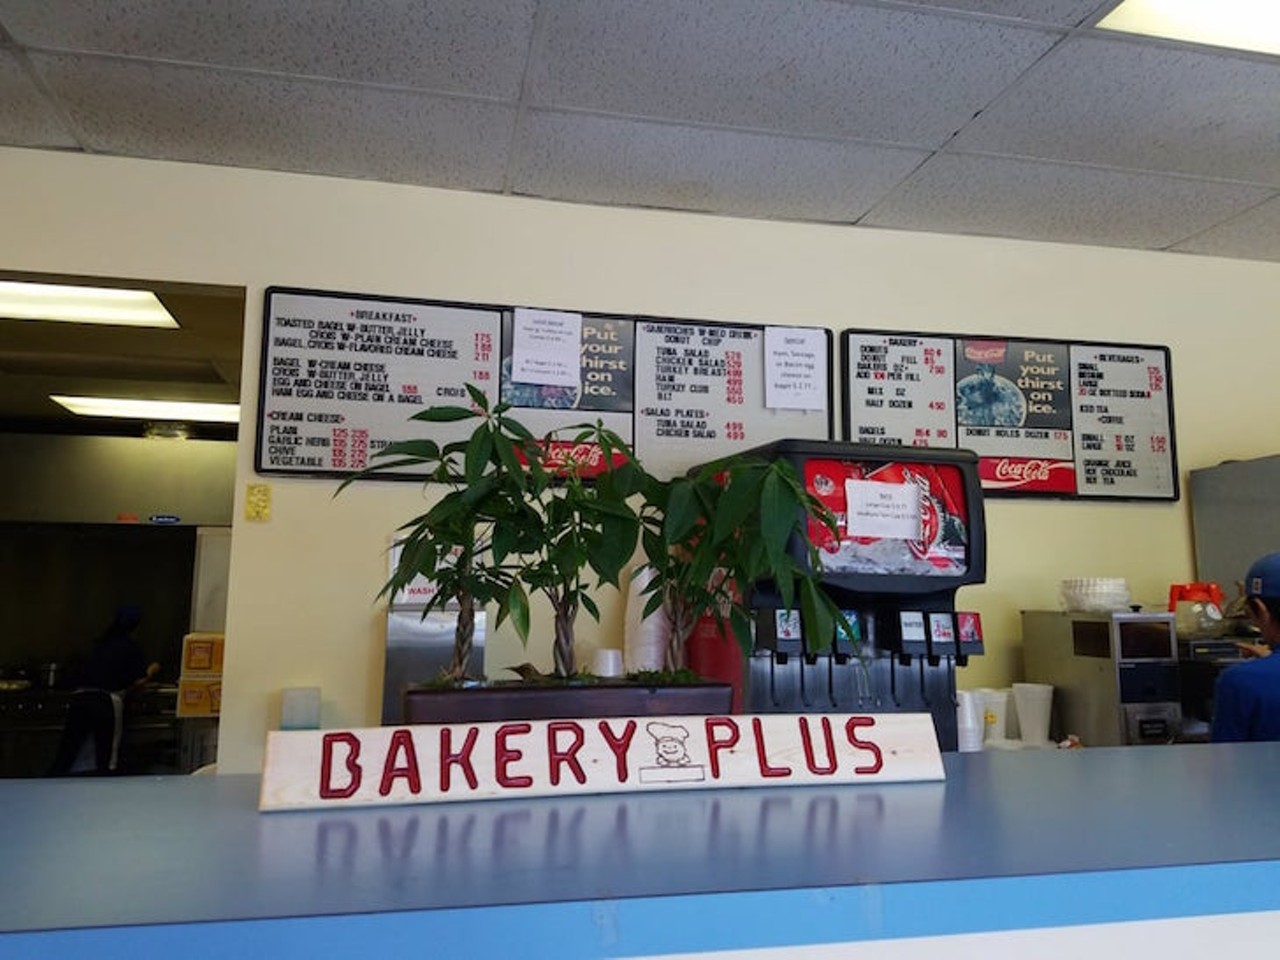 
Bakery Plus
915 E. Michigan St., Orlando (407) 849-1888
This little bakery off Michigan Street serves quality doughnuts and pastries crafted with flavors that showcase this spot&#146;s baking experience. Don&#146;t miss the Fruity Pebbles-topped glazed yeast.
Photo via Jensine I./Yelp